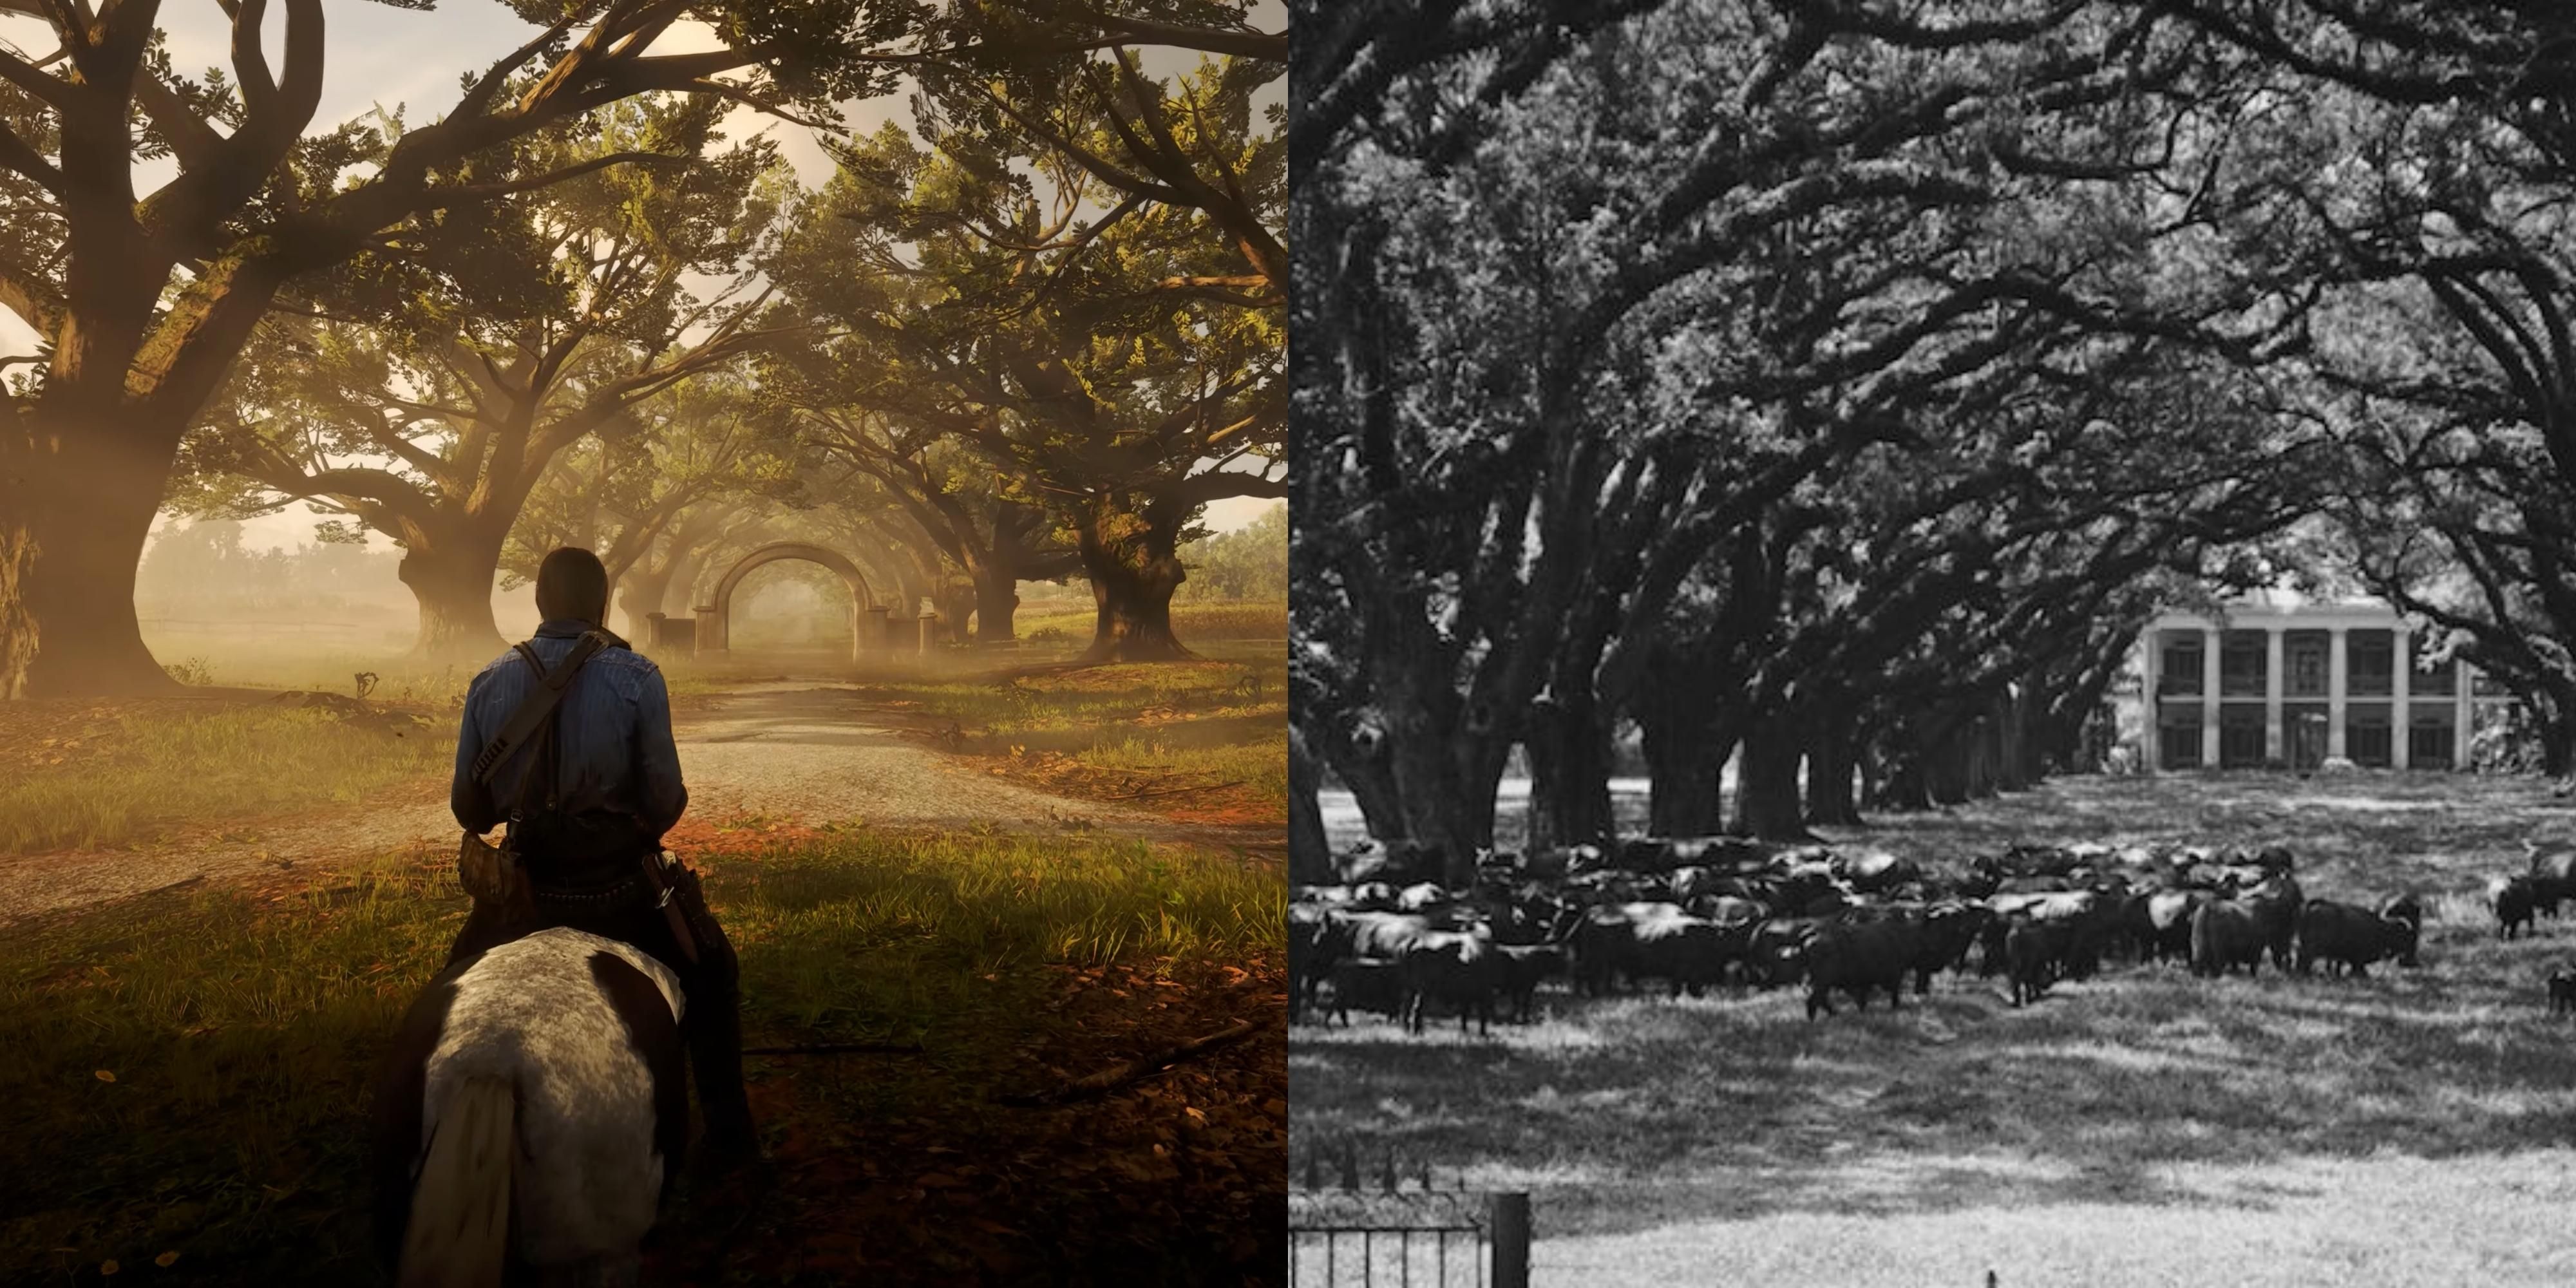 Side by side comparison of RDR2's Braithwaite Manor and Oak Alley Plantation